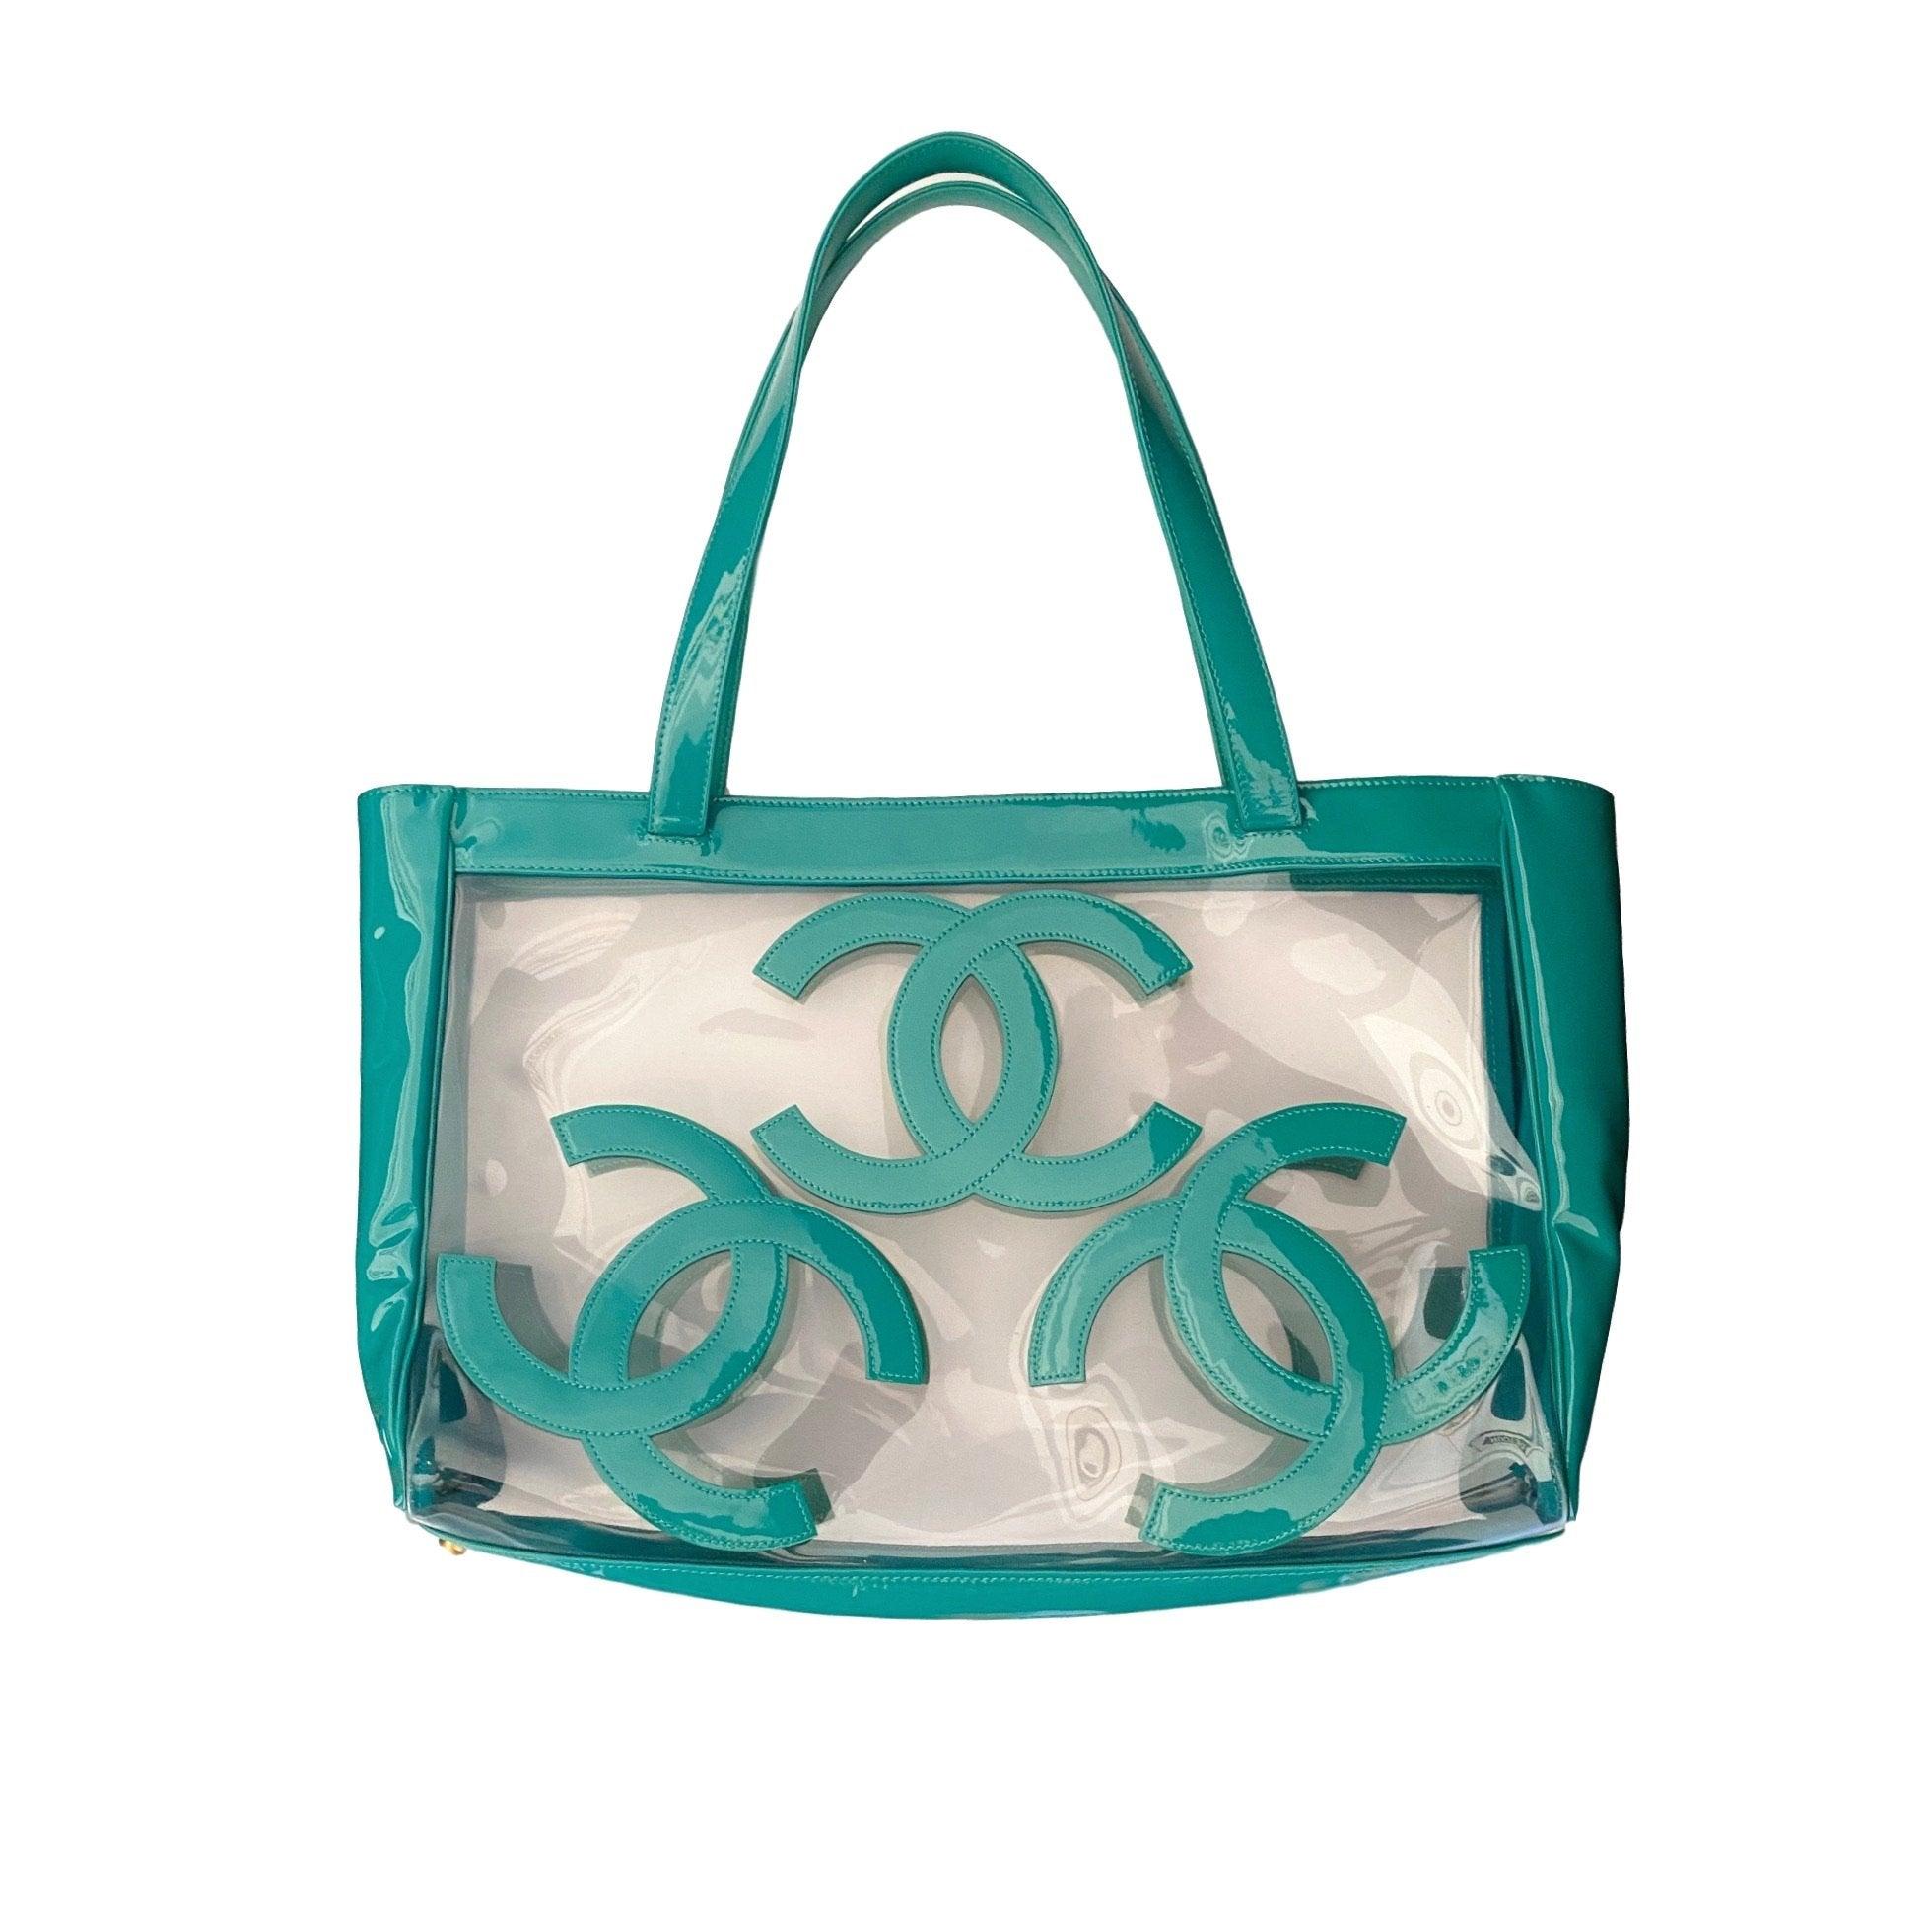 Treasures of NYC - Chanel Turquoise Transparent Bag